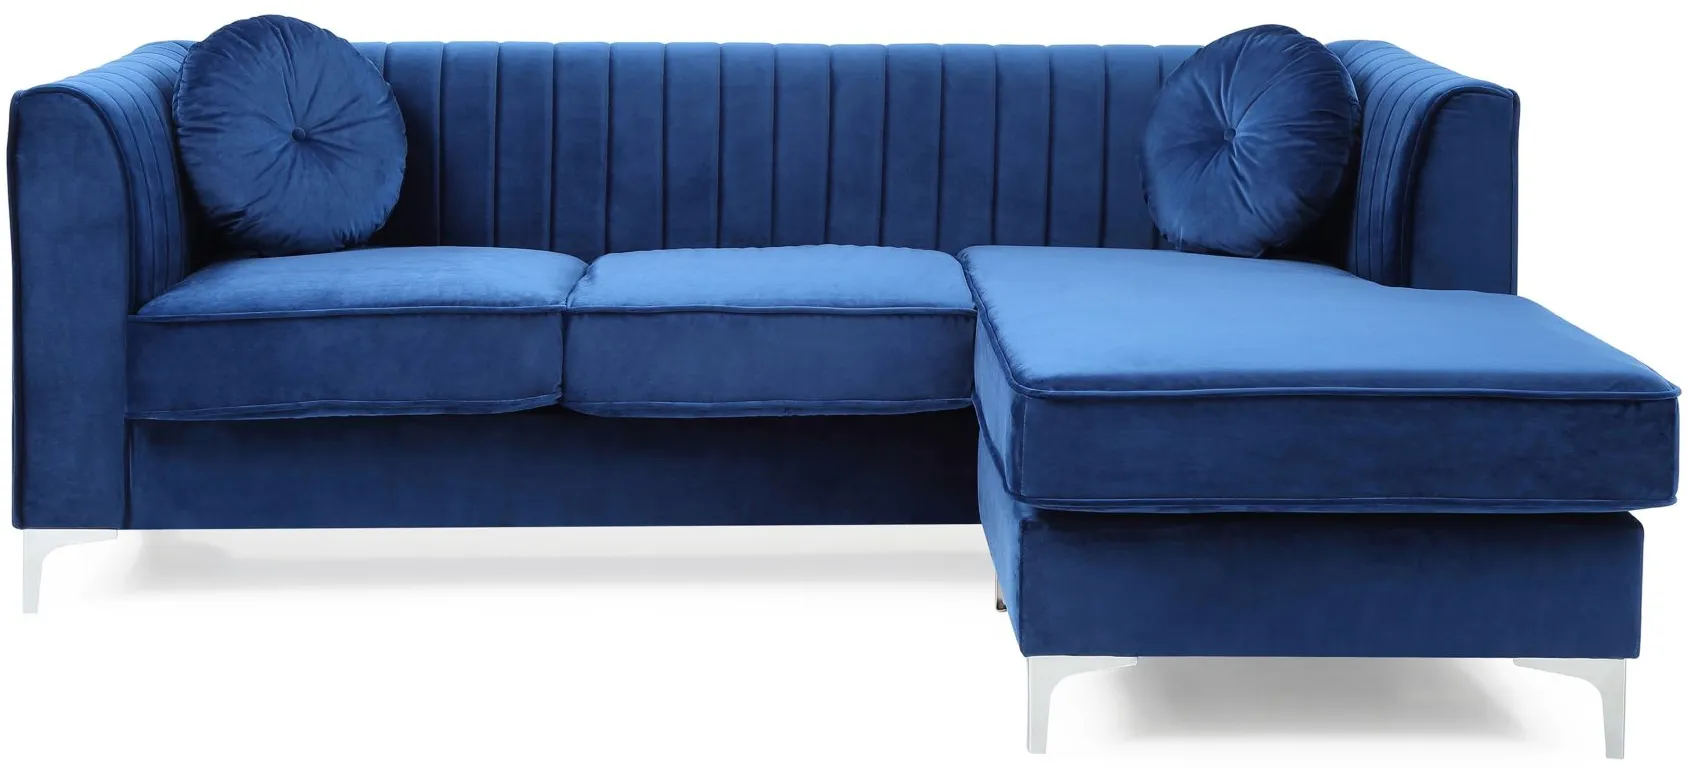 Deltona 2-pc. Reversible Sectional Sofa in Blue by Glory Furniture